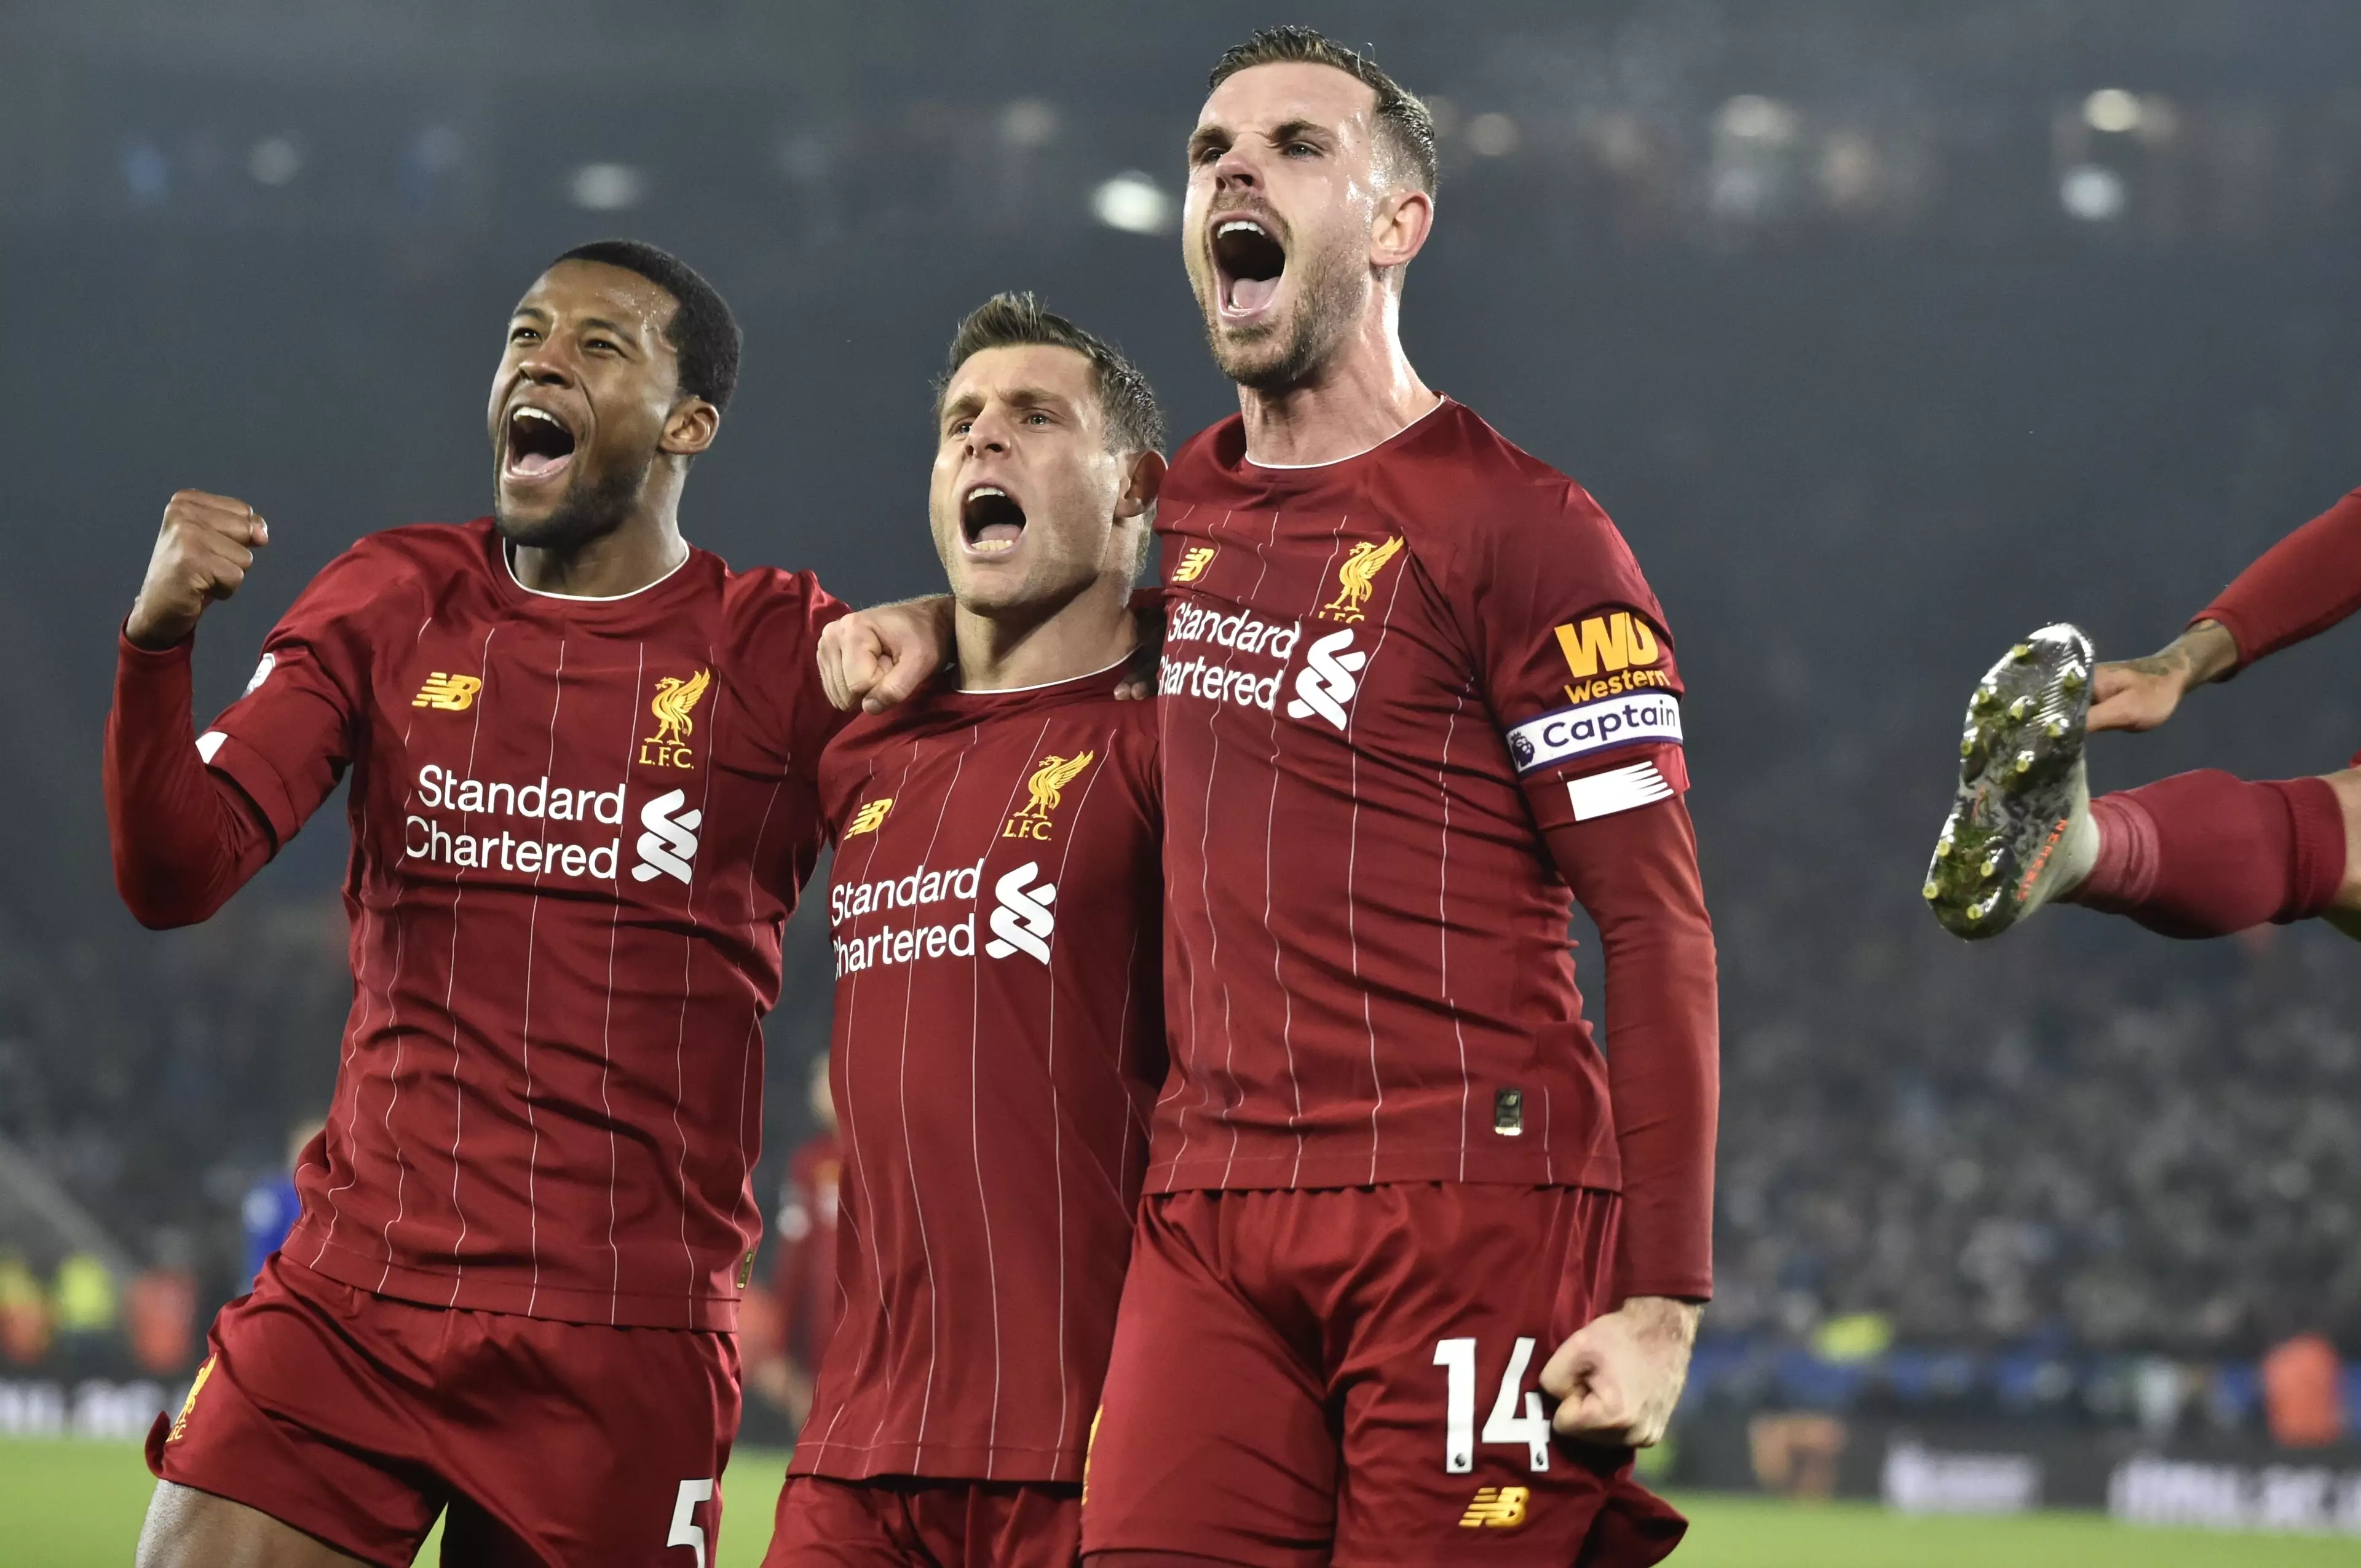 Liverpool moved 13 points clear at the top of the Premier League with their latest win